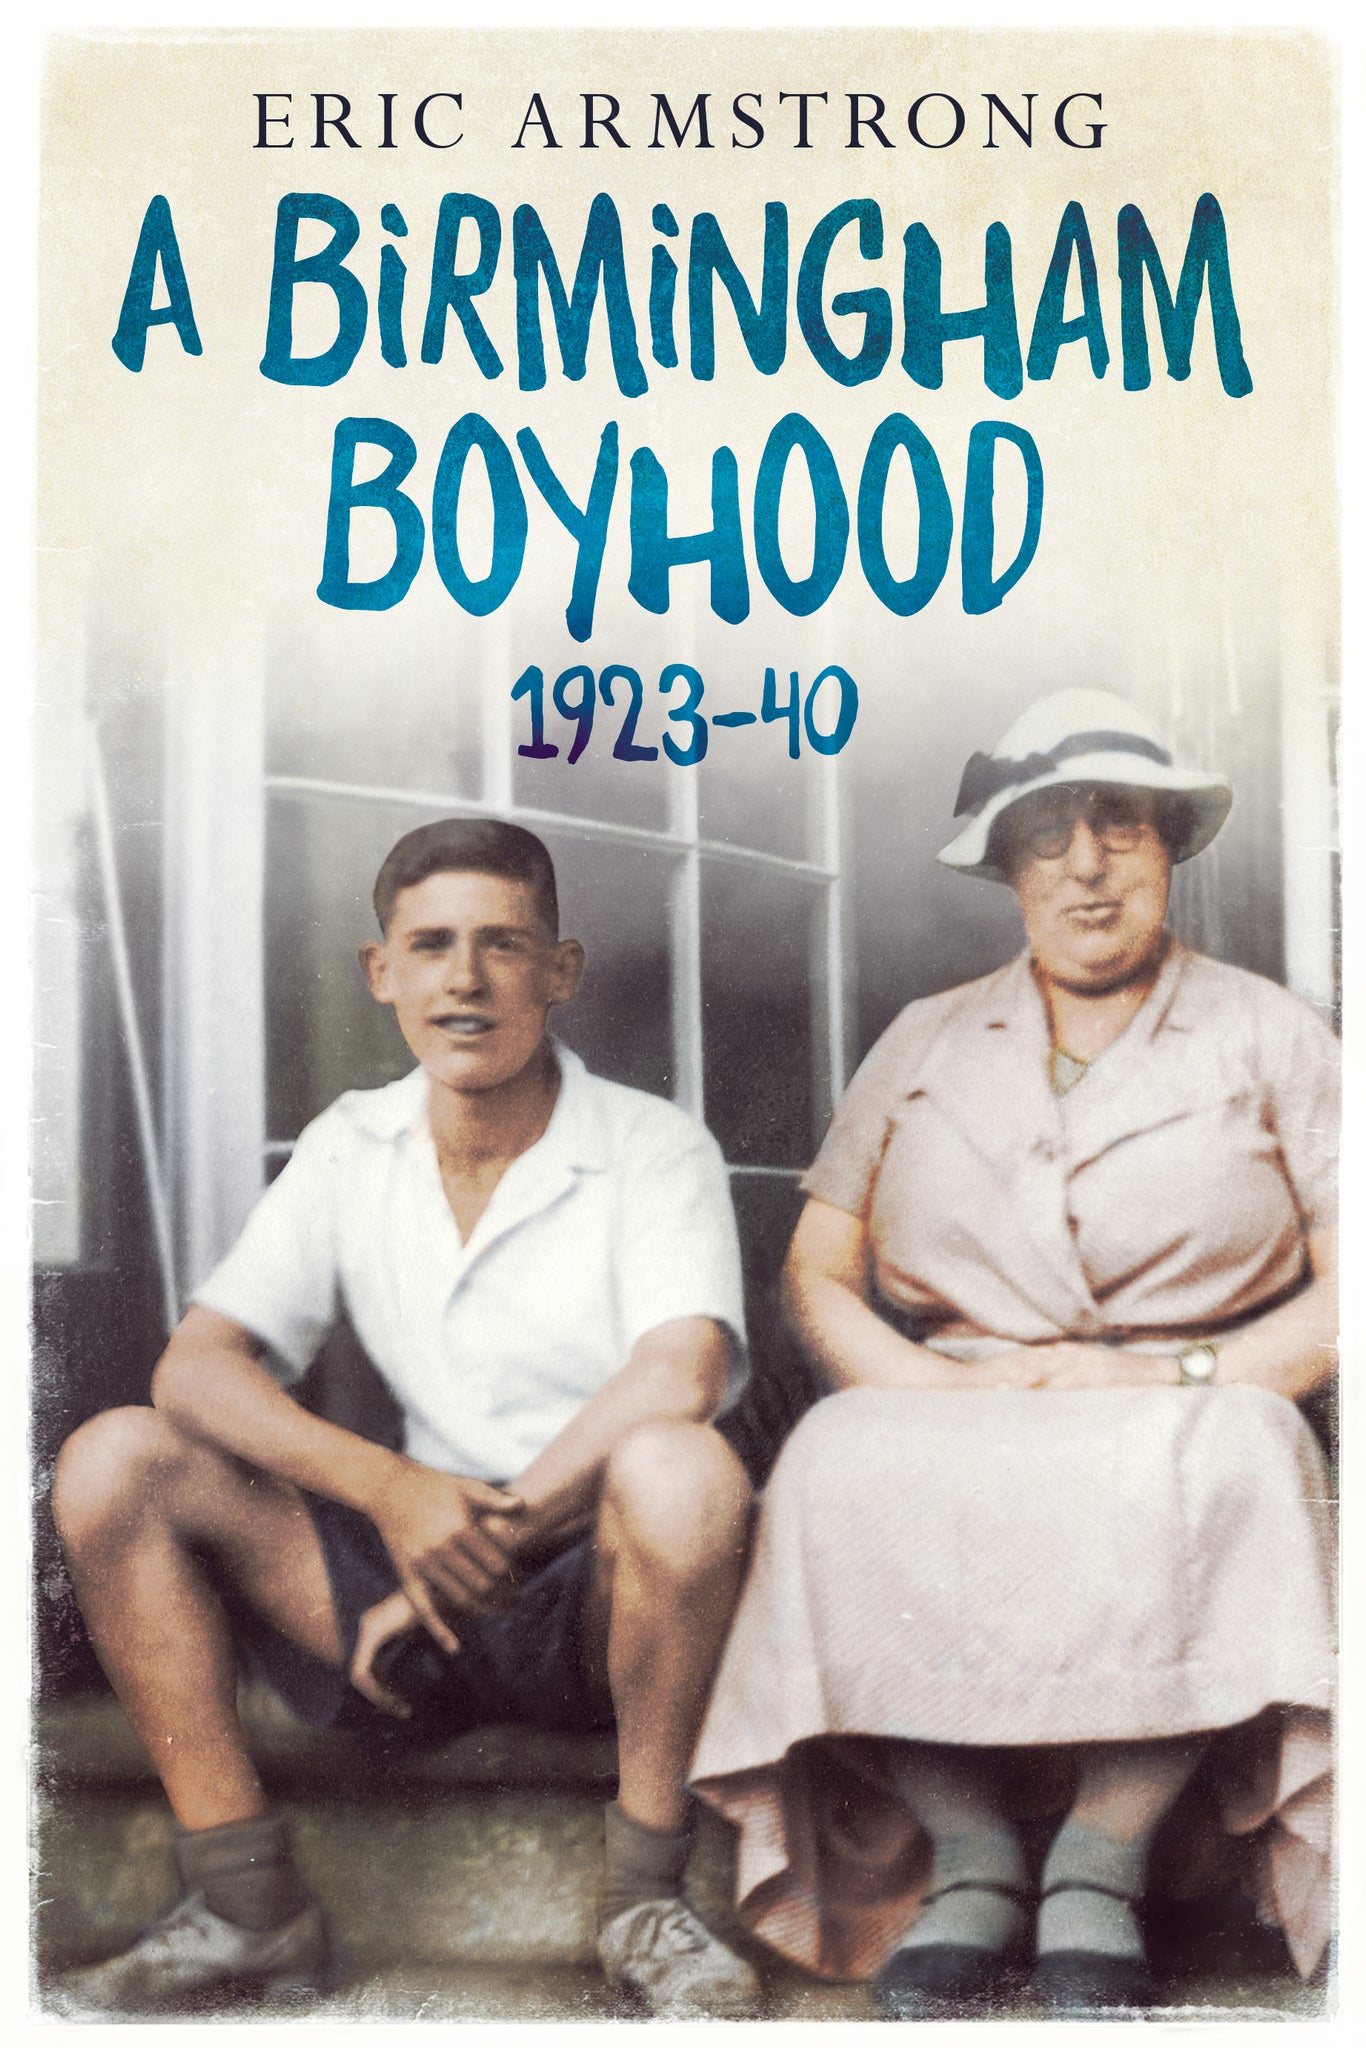 A Birmingham Boyhood 1923 - 40 - available now from Fonthill Media